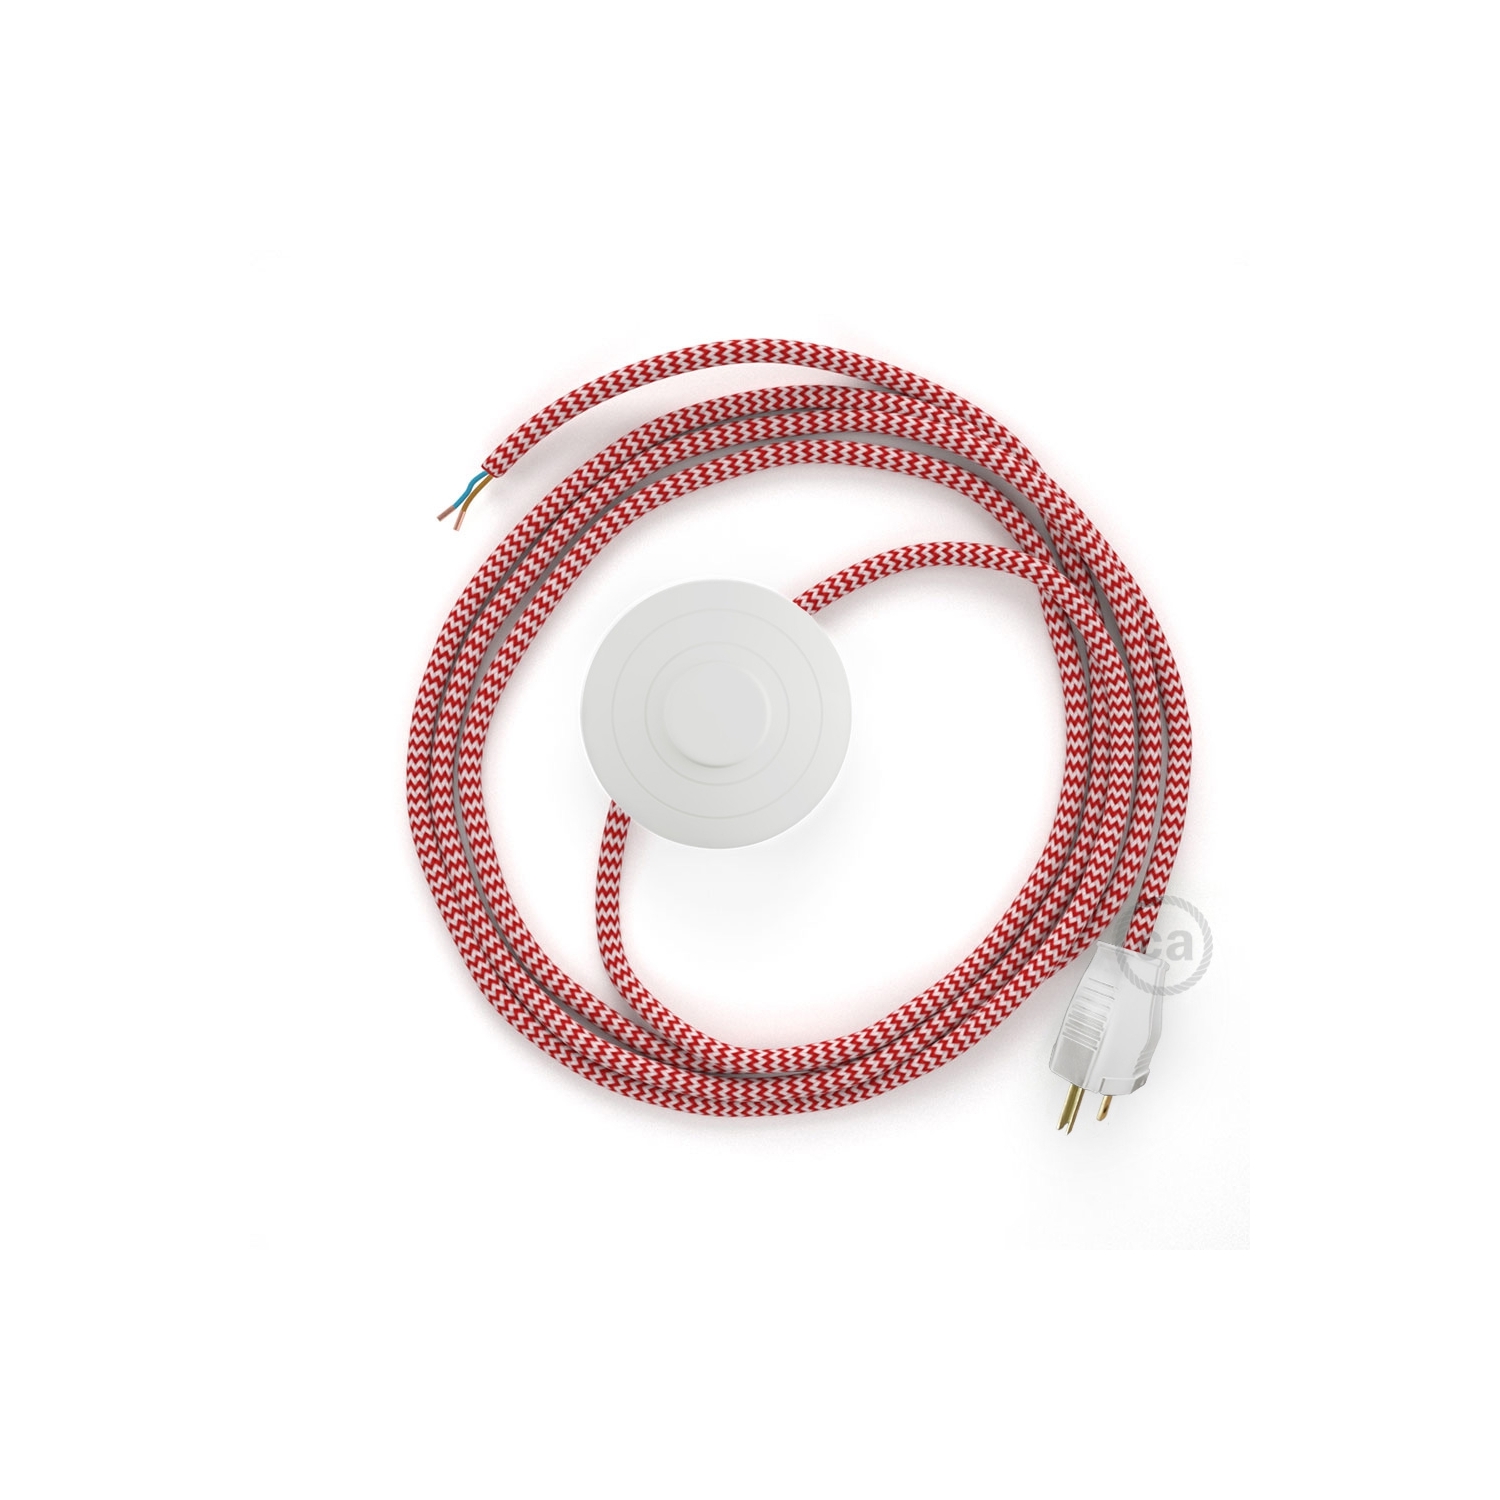 Power Cord with foot switch, RZ09 Red & White Chevron - Choose color of switch/plug